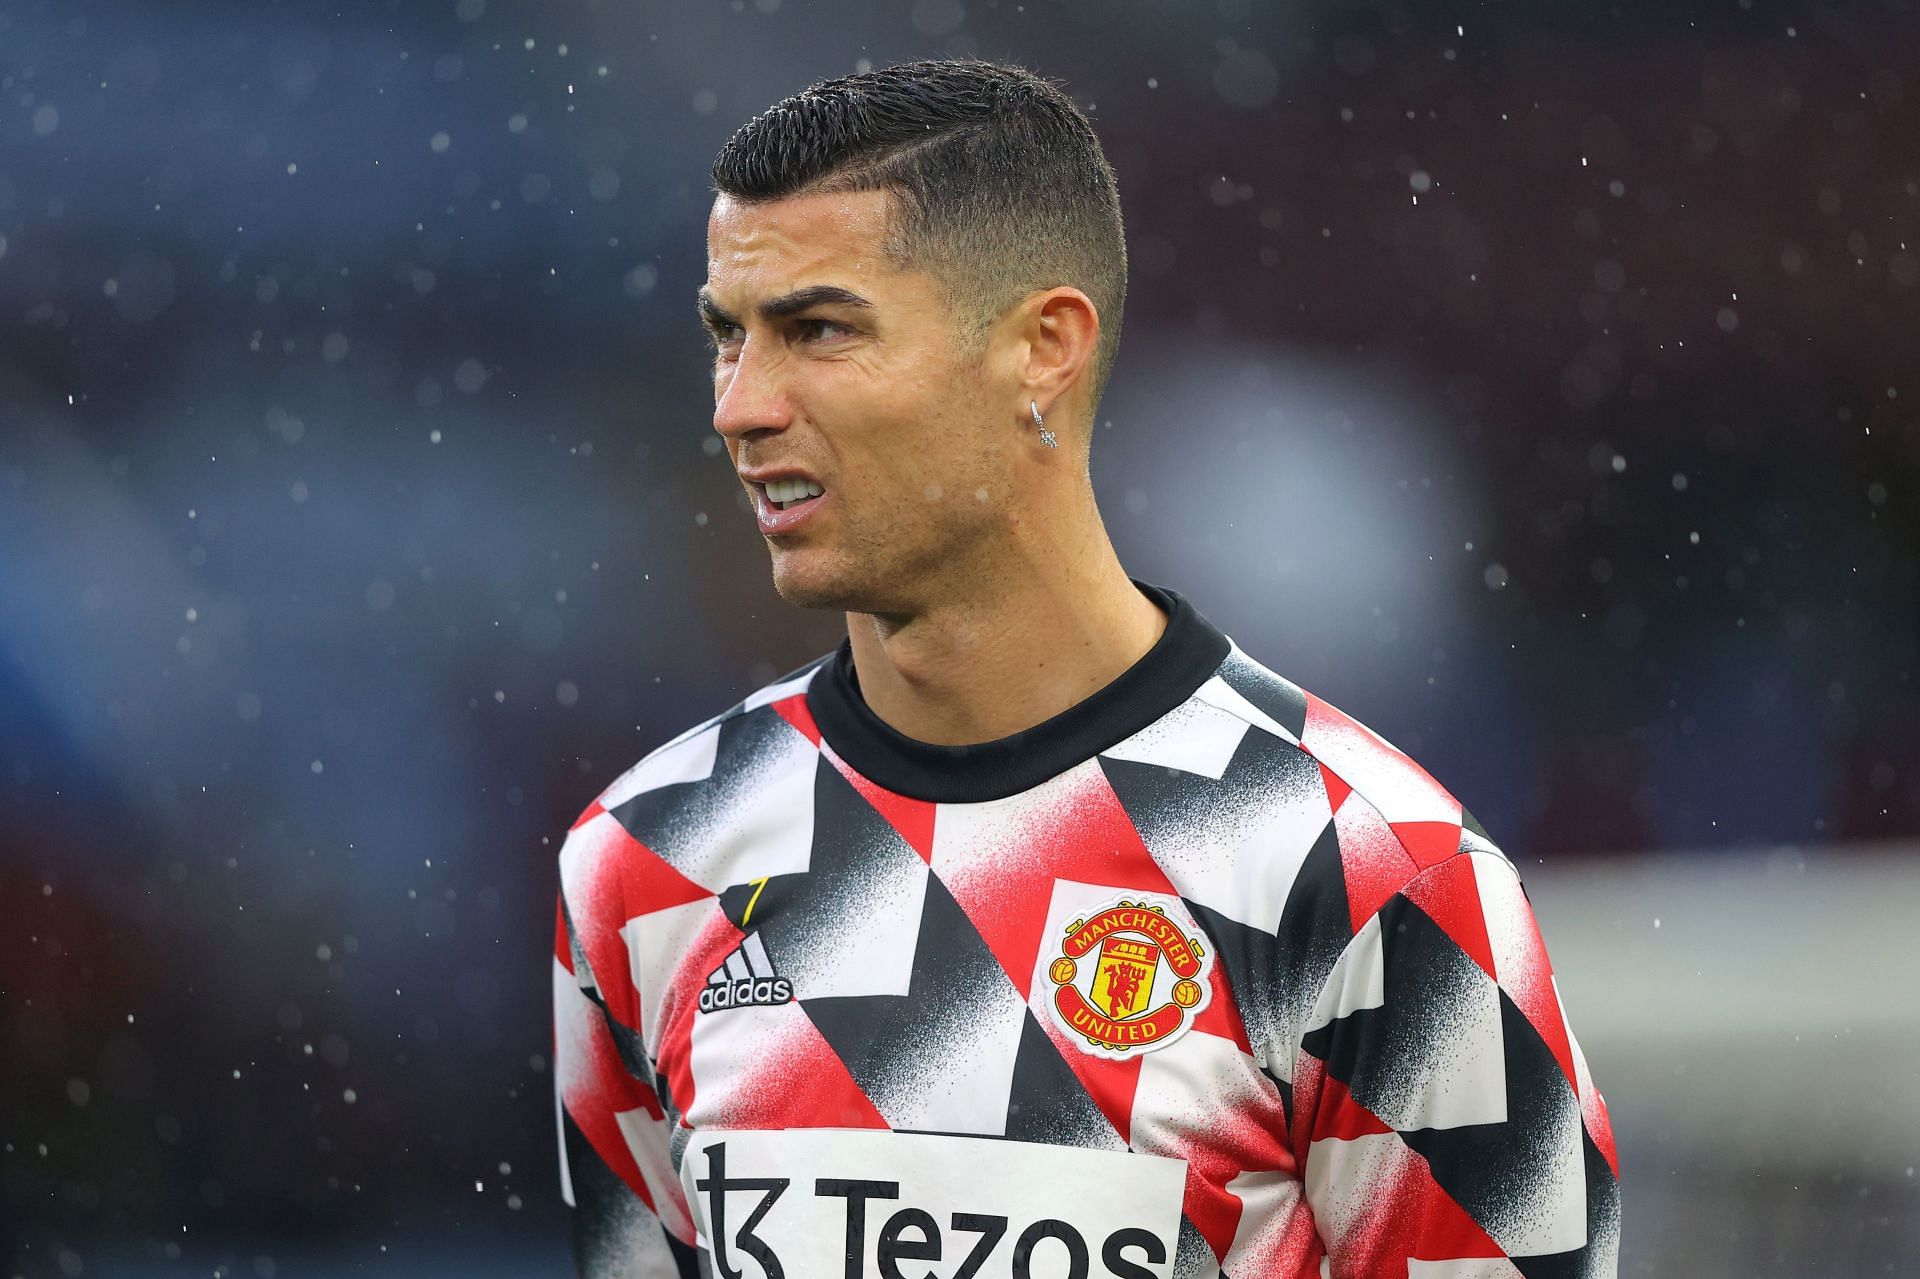 Cristiano Ronaldo has been a frustrated figure at Old Trafford this season.